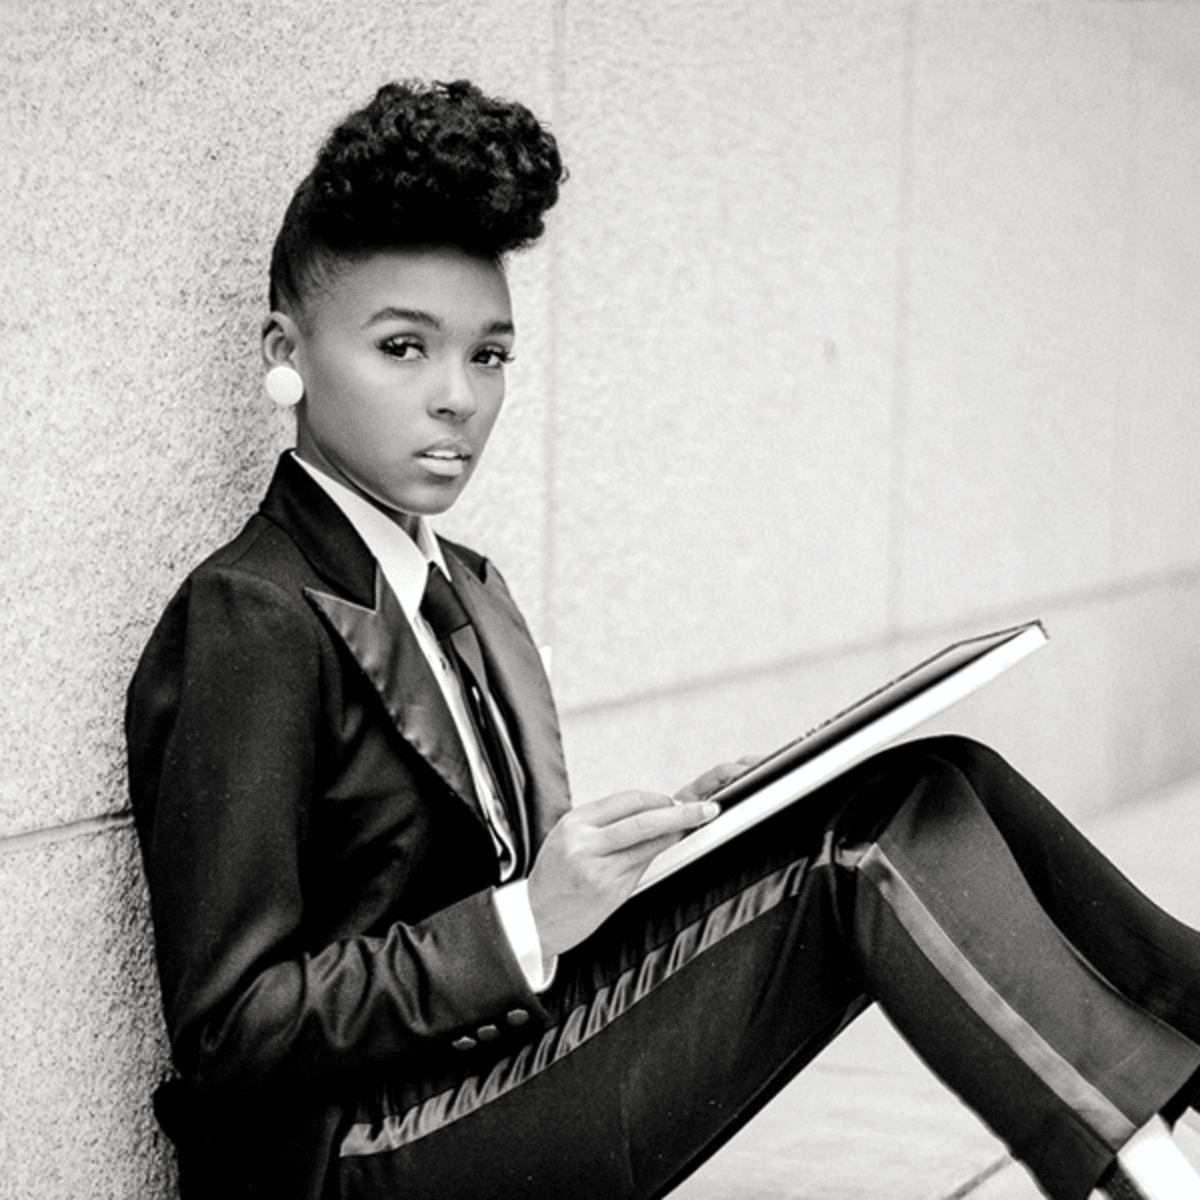 What Janelle Monáes Remark About Withholding Sex Gets Right pic